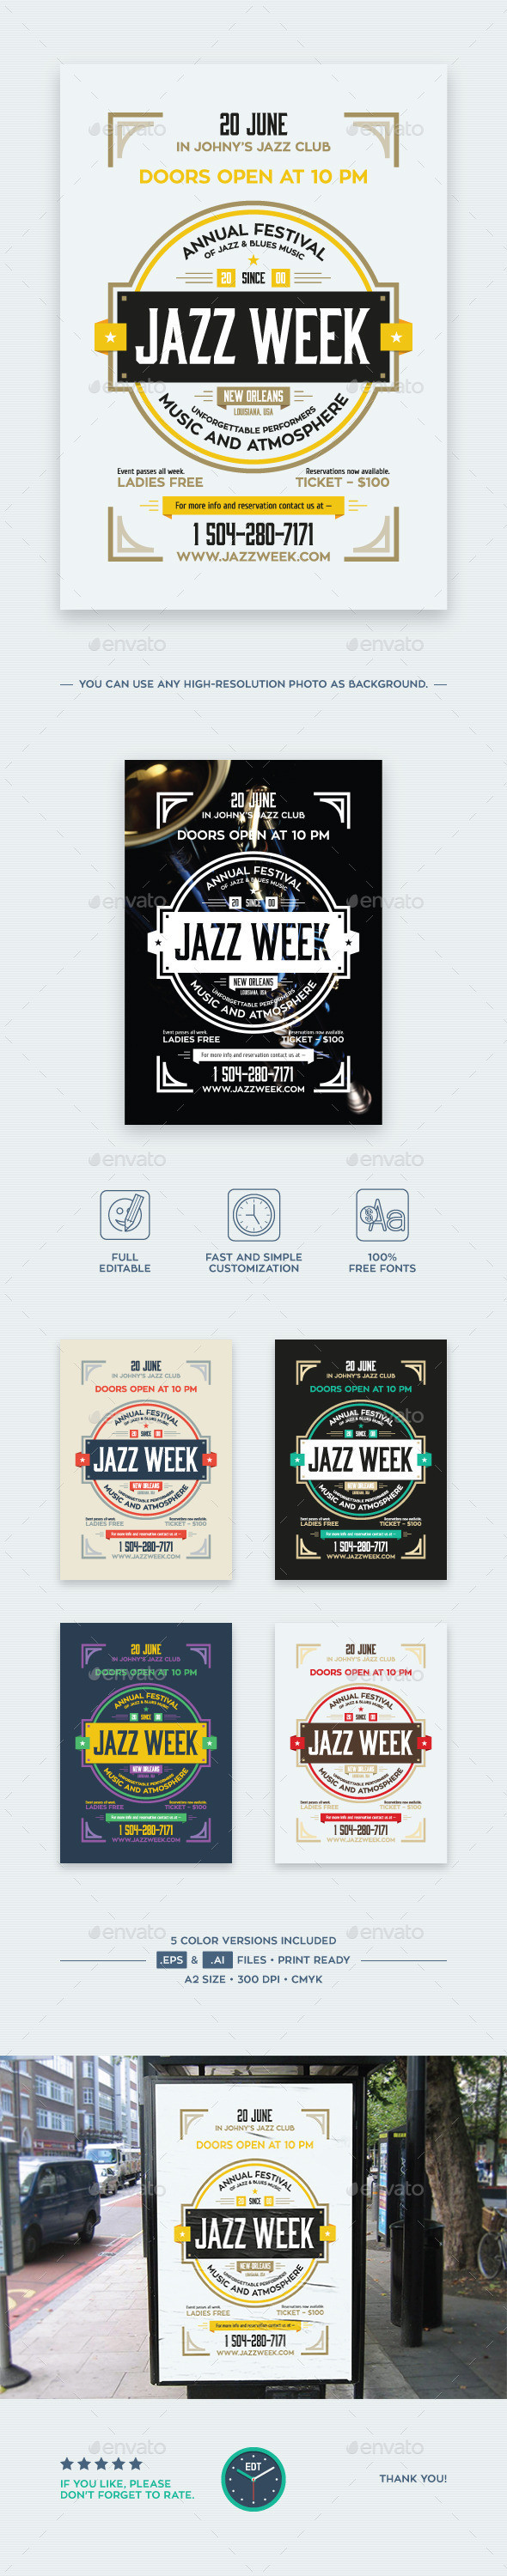 Jazz week poster preview  envato edt  590x3000px